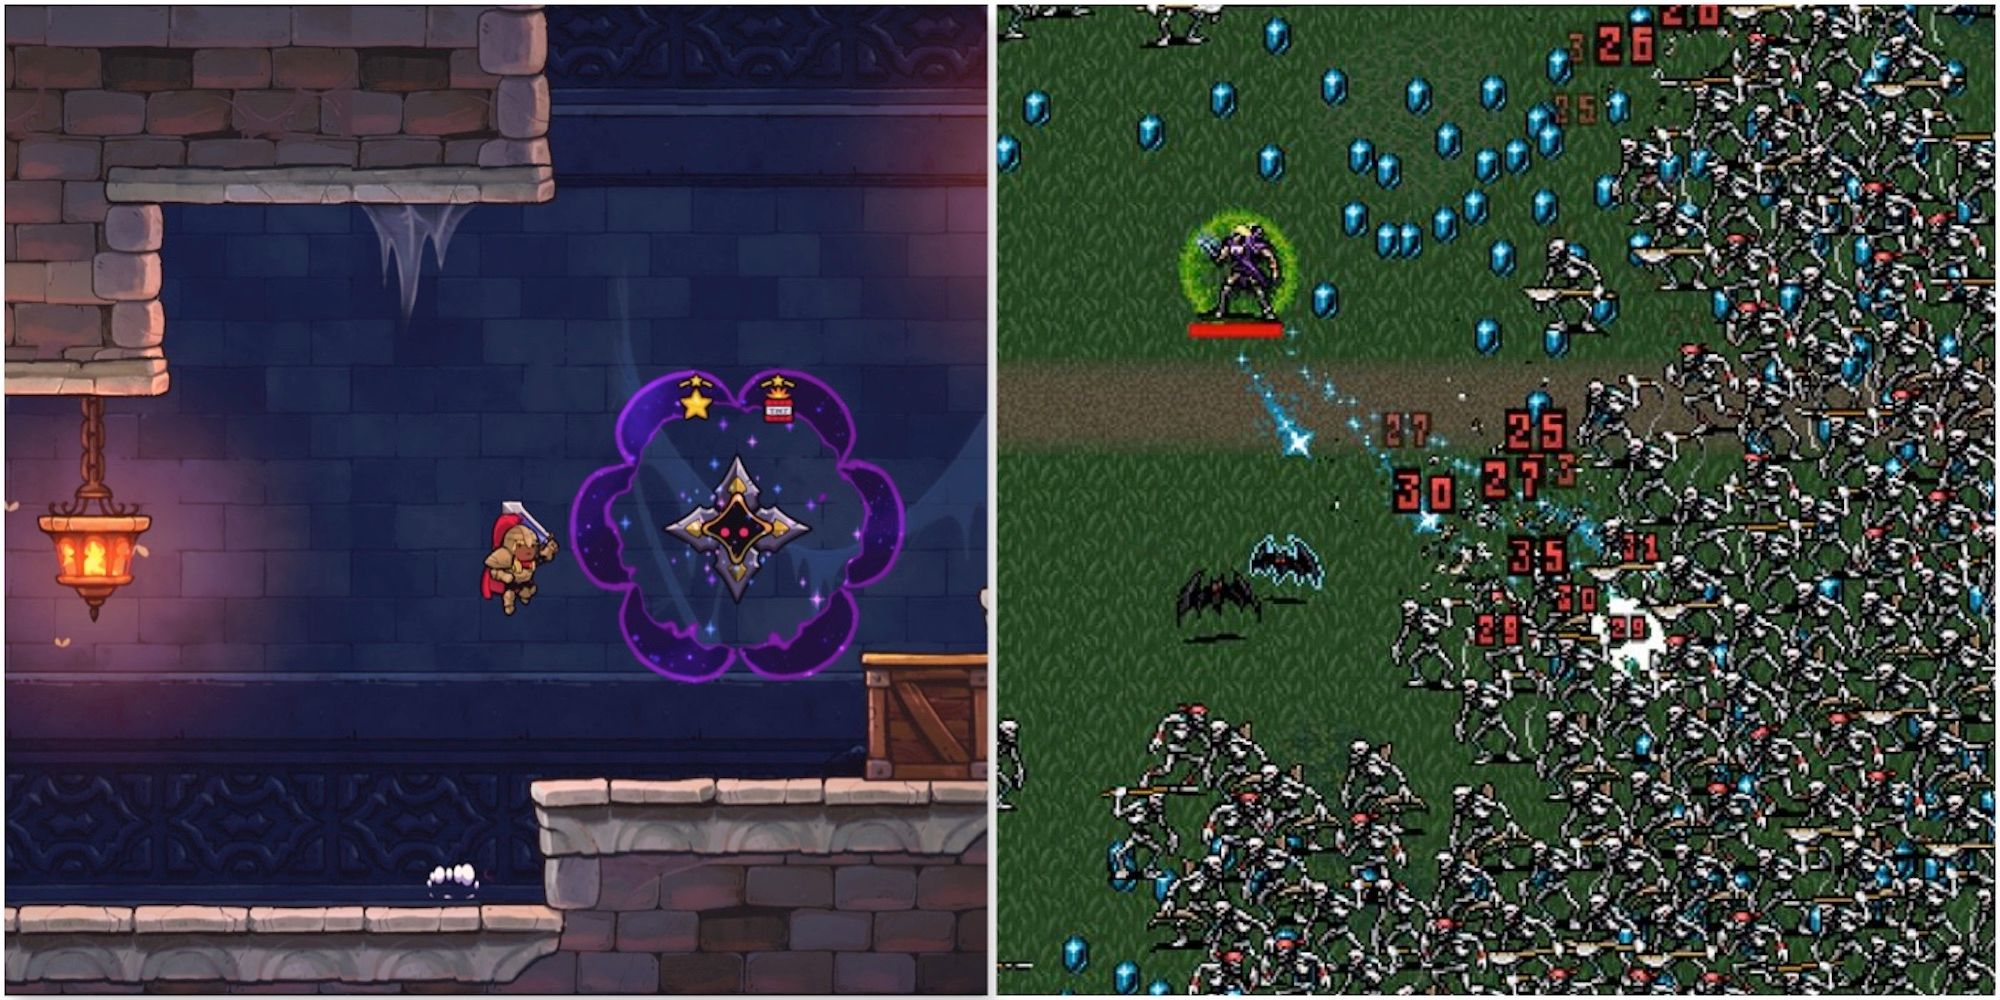 Fighting enemies in Rogue Legacy 2 and Vampire Survivors